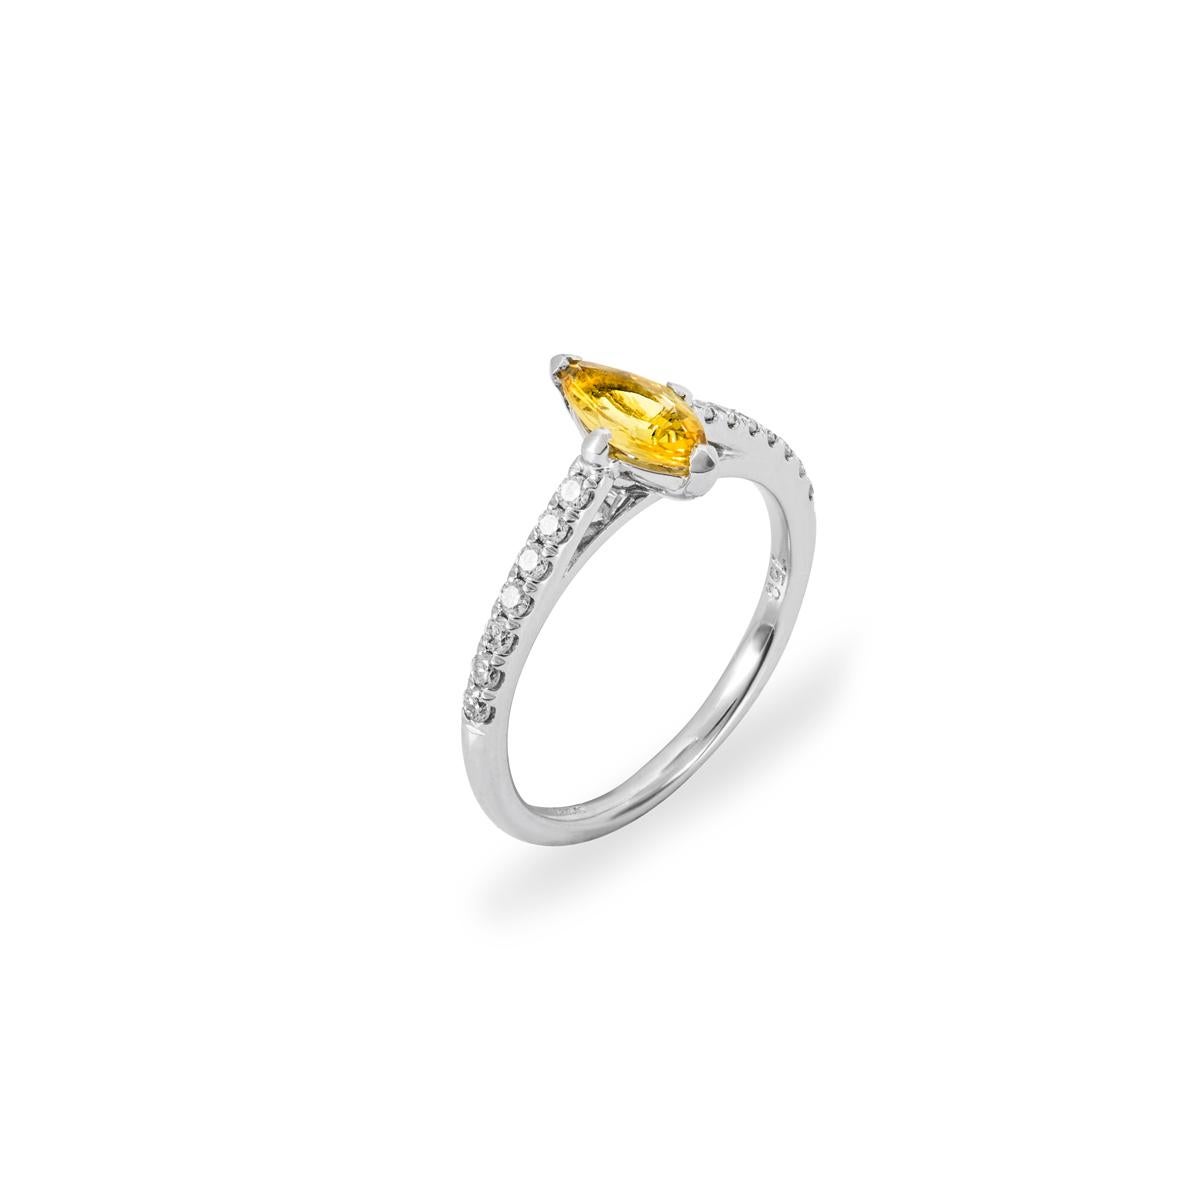 A charming yellow sapphire and diamond ring set in 18k white gold. The ring features a marquise cut vivid yellow sapphire set to the centre weighing 0.57ct. Accentuating the yellow sapphire are 14 round brilliant cut diamonds pave set to the